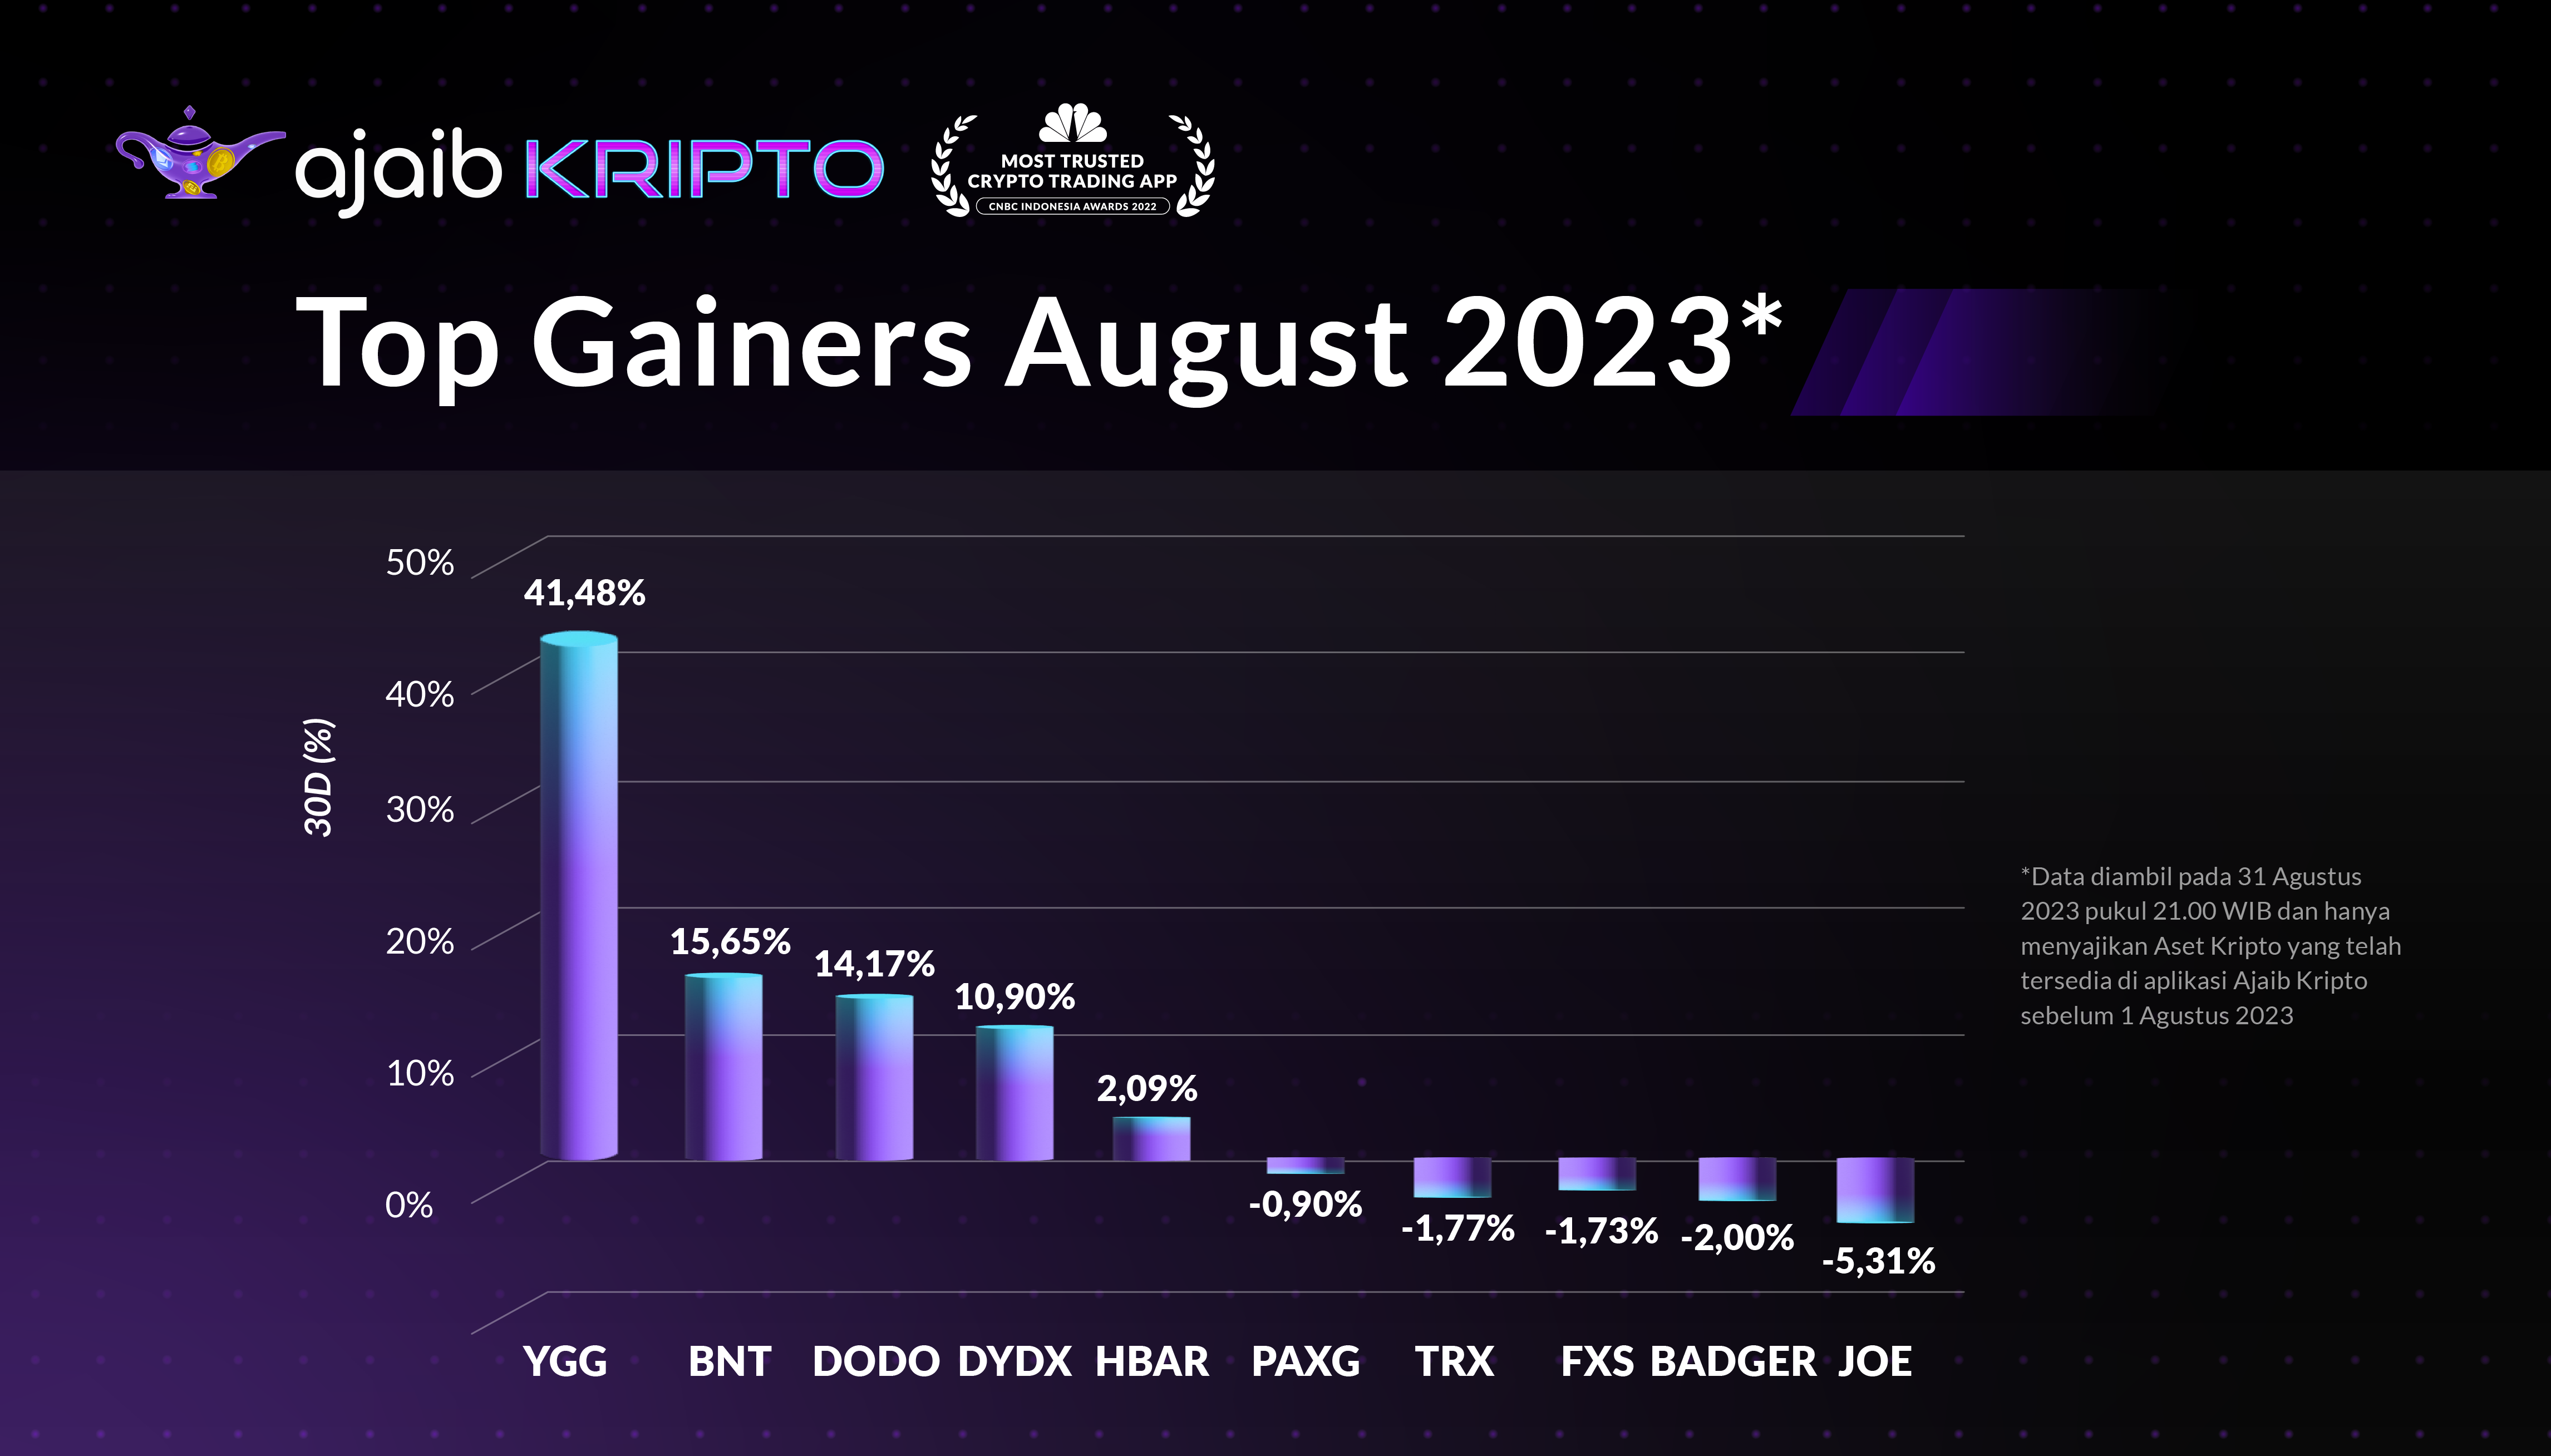 Top gainers agustus 2023